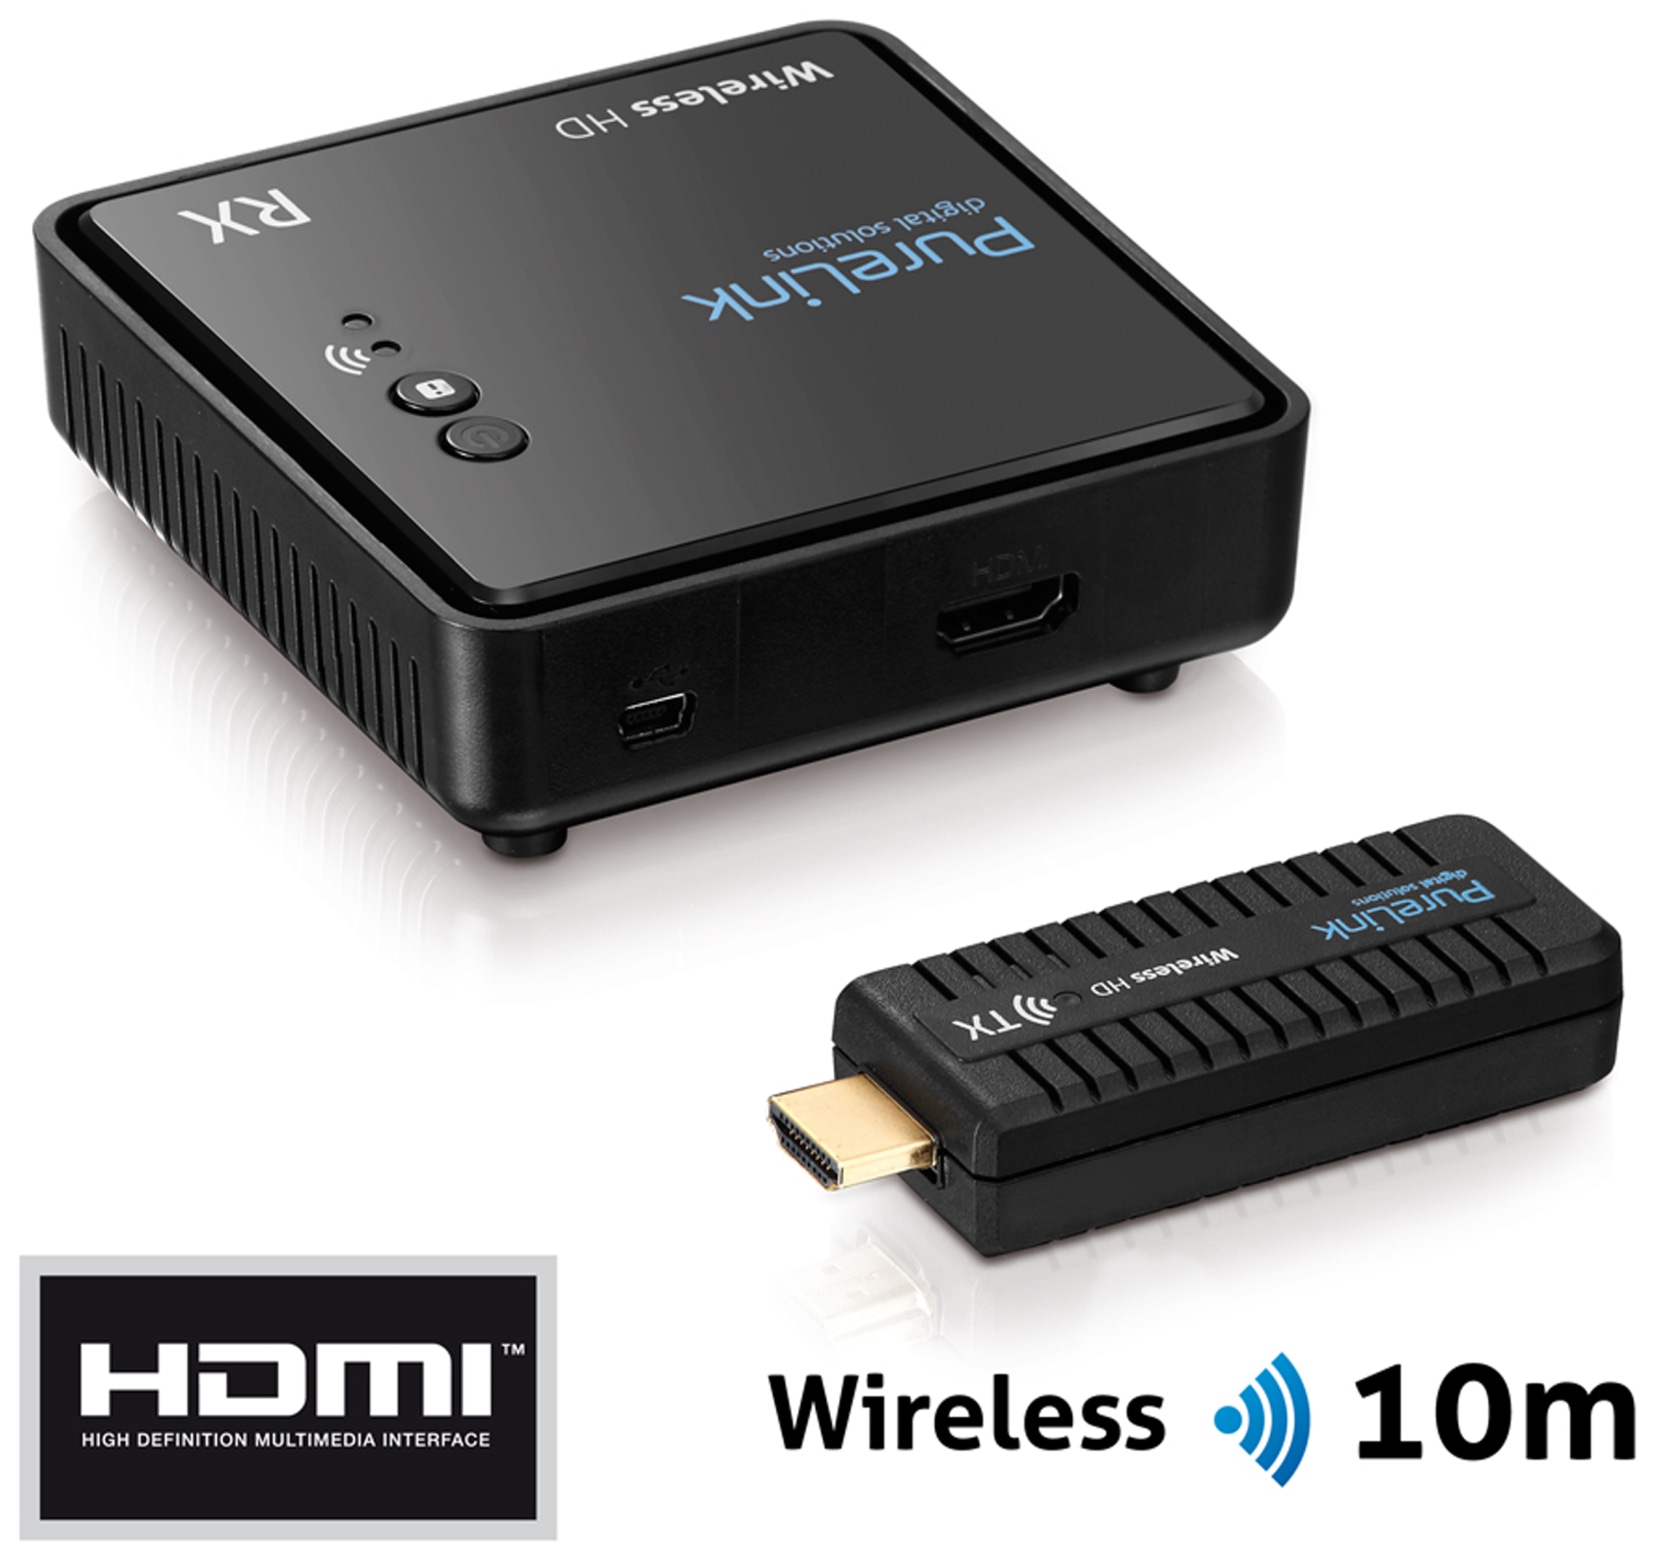 Purelink Wireless HDMI System WHD030-V2